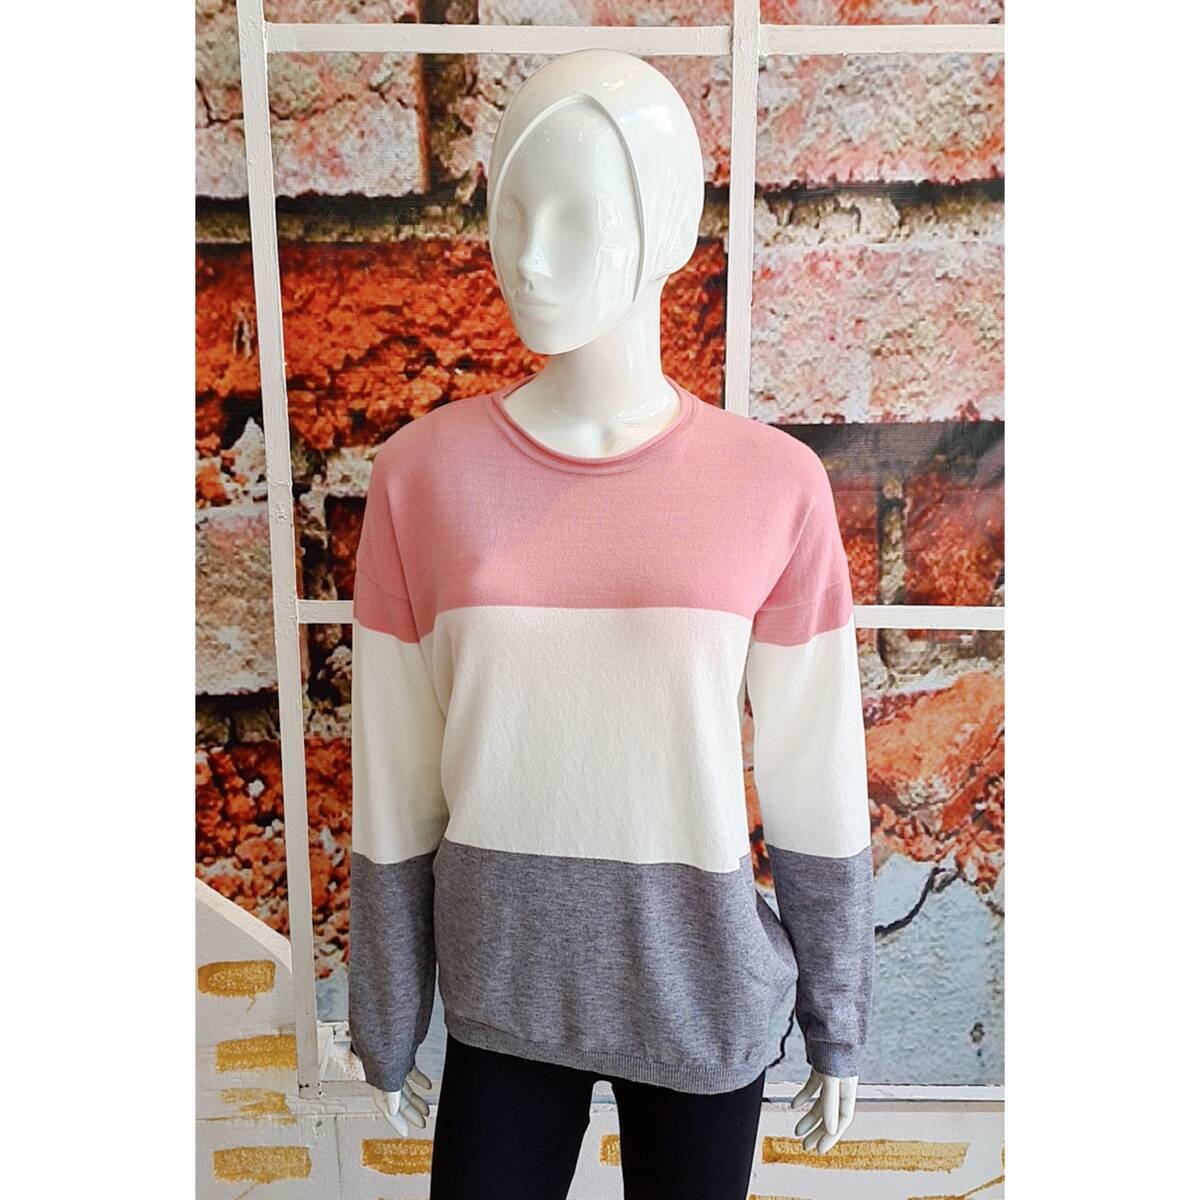 Imagen producto Sweater 3